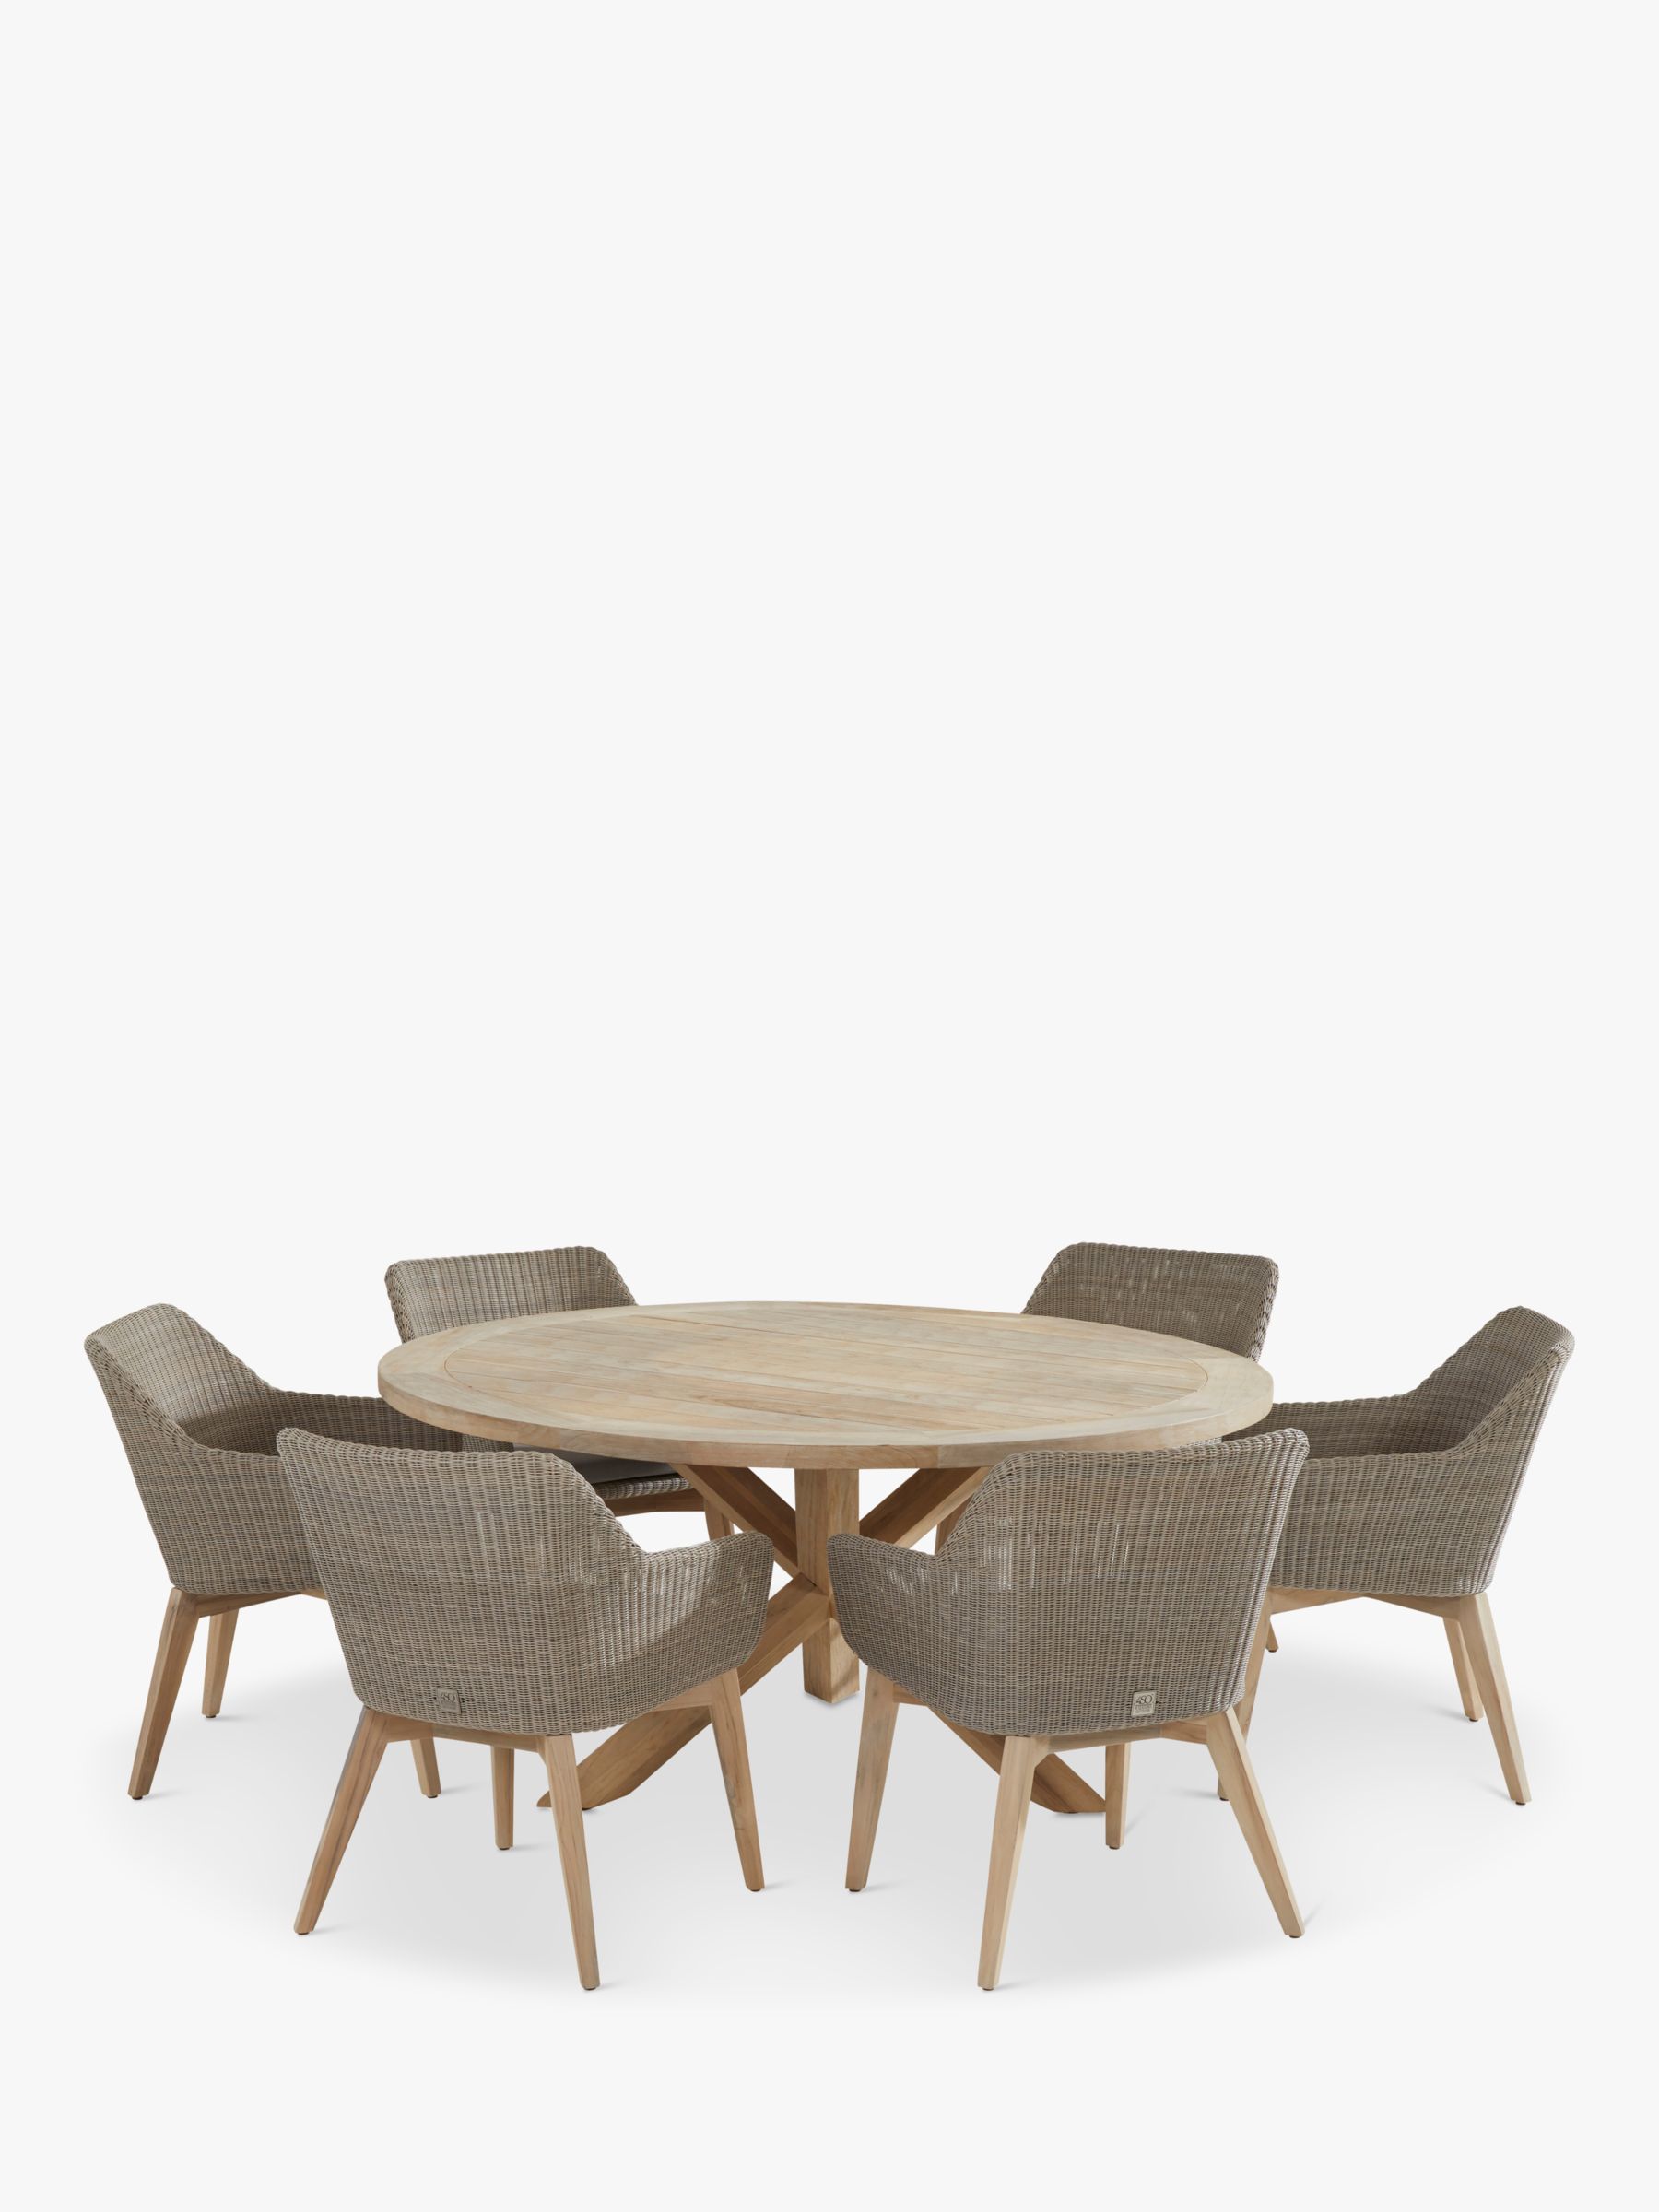 Photo of 4 seasons outdoor avila 6-seater round garden dining table & chairs set fsc-certified -teak wood- pebble